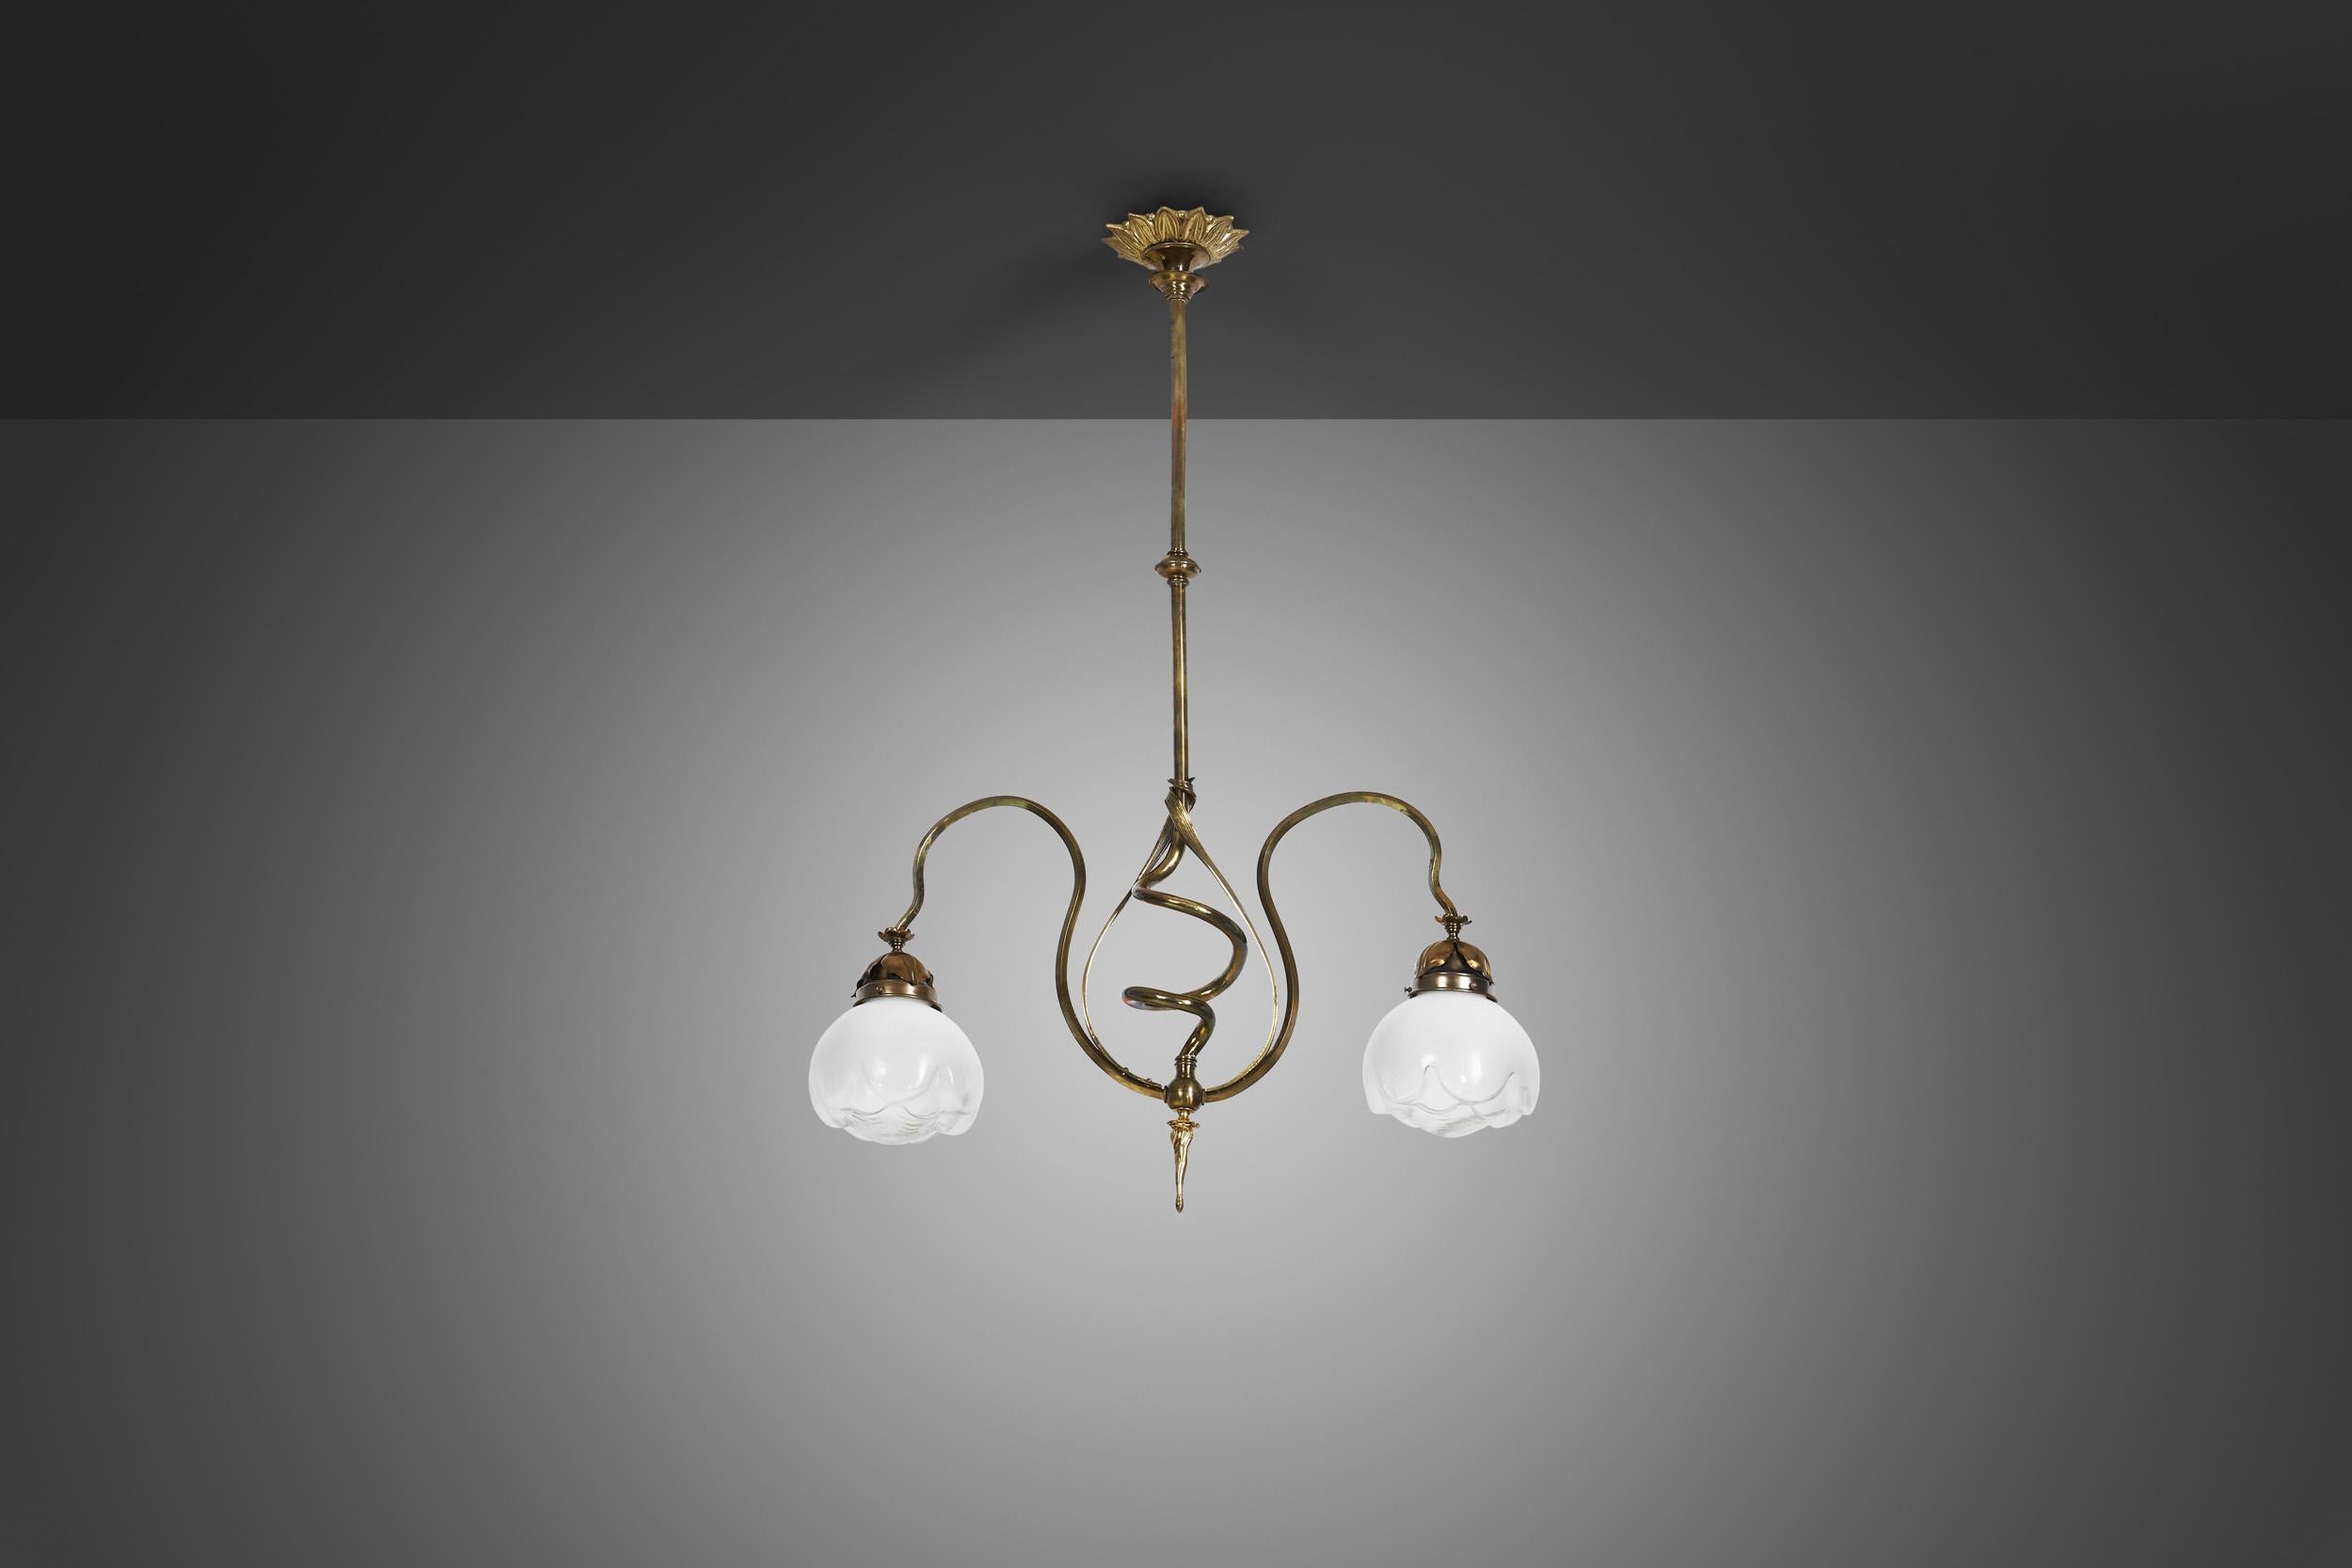 Jugend Ceiling Lamp in Patinated Brass and Glass, Europe early 20th century For Sale 1